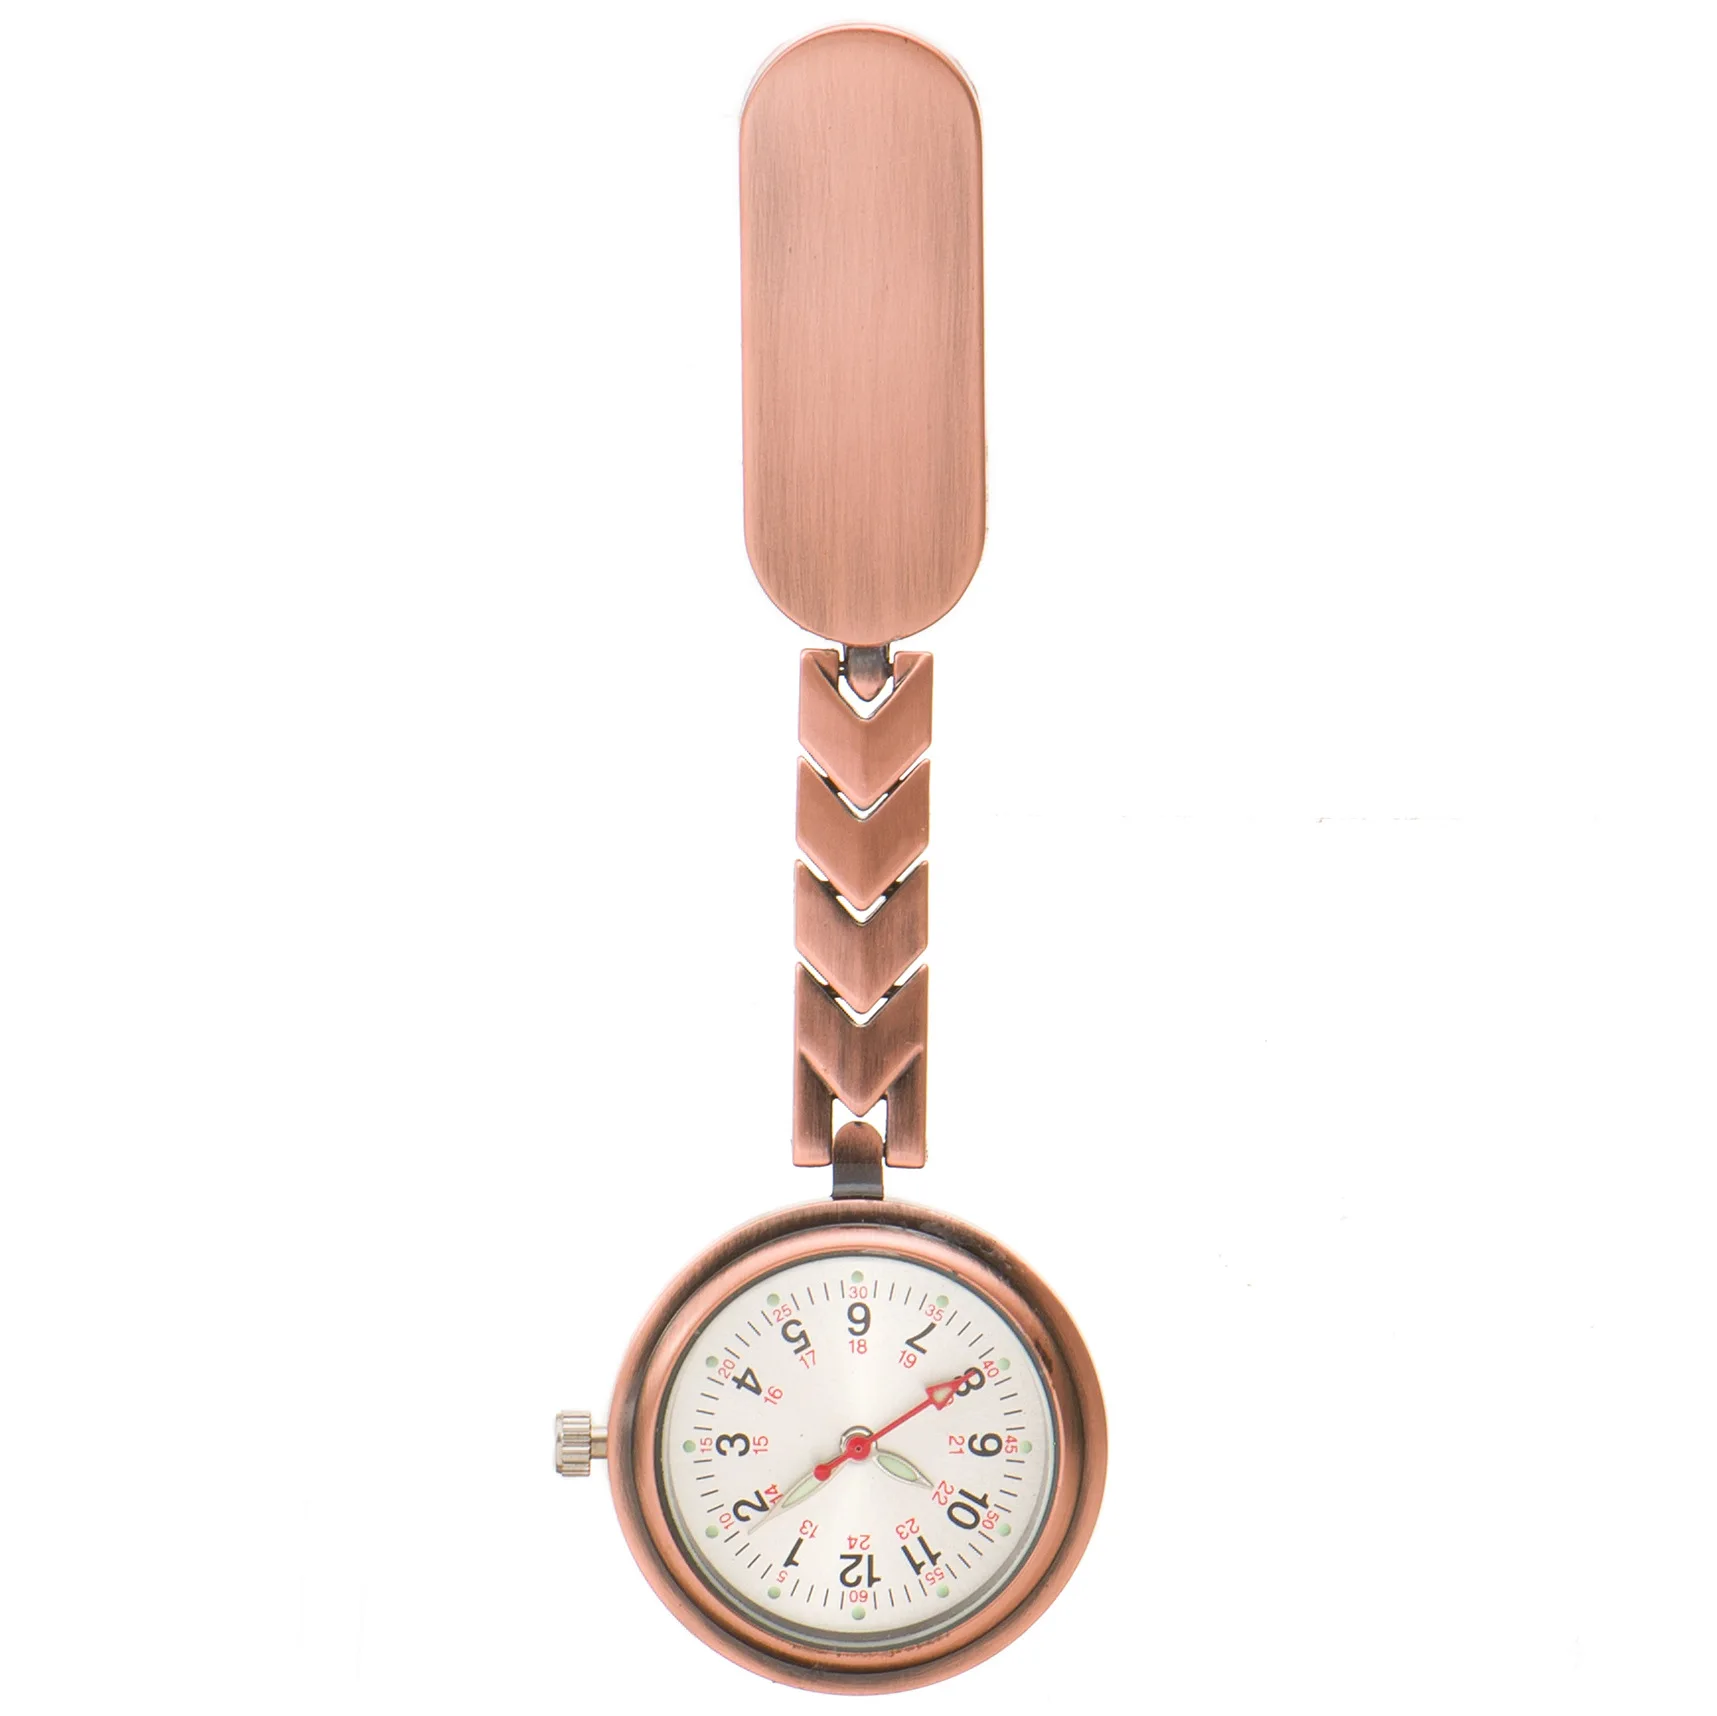 Luminous Nurse Watch Quartz fob Pocket High-Quality Doctor Clock with Clip Nurse Fob Watch Hospital Gift dots silicone nurse watch fob pocket watch doctor nurse gift colored dial japanese high quality hospital clock alk vision